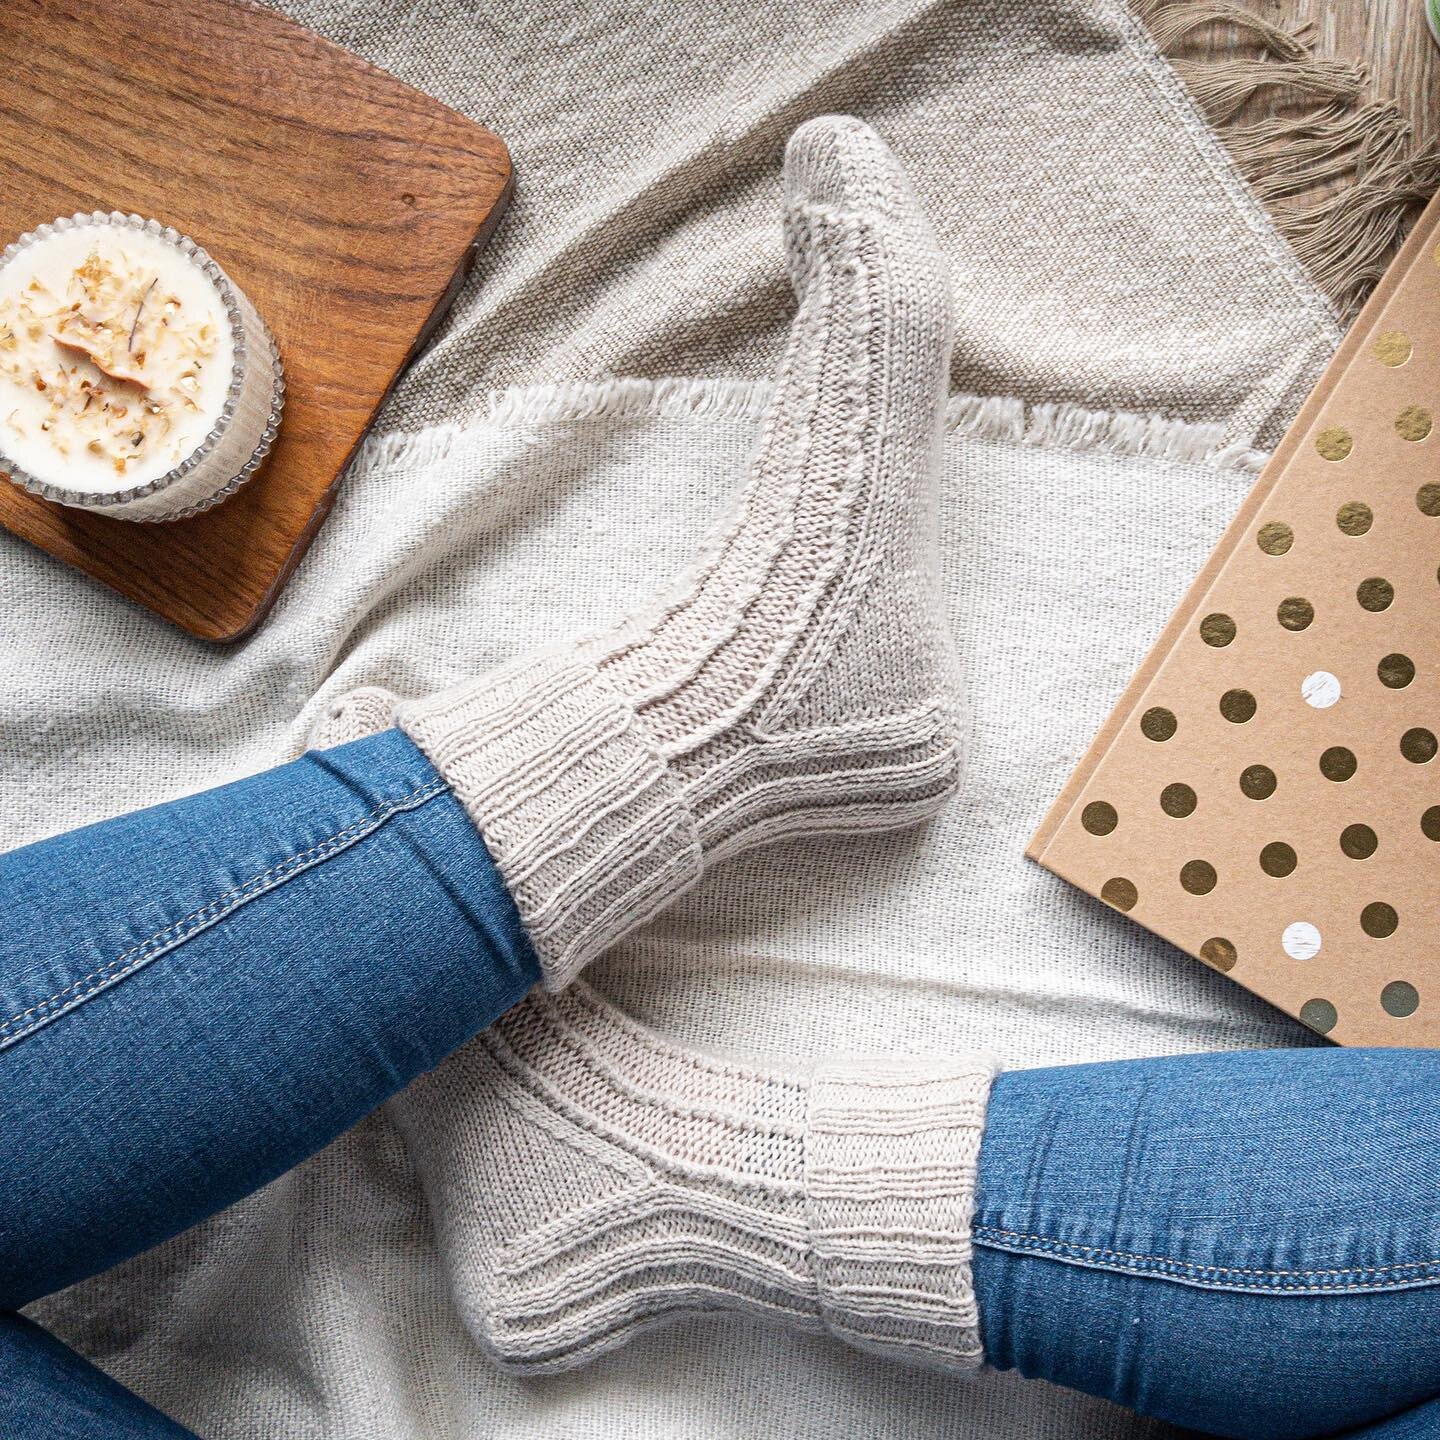 Test knit call! Seafoam Socks are ready for testing! They're classic, cozy and striped - worked cuff down, with a heel flap and gusset construction, will make a staple in your sock drawer!
⠀⠀⠀⠀⠀⠀⠀⠀⠀
If you'd like to test knit this design - sign up th